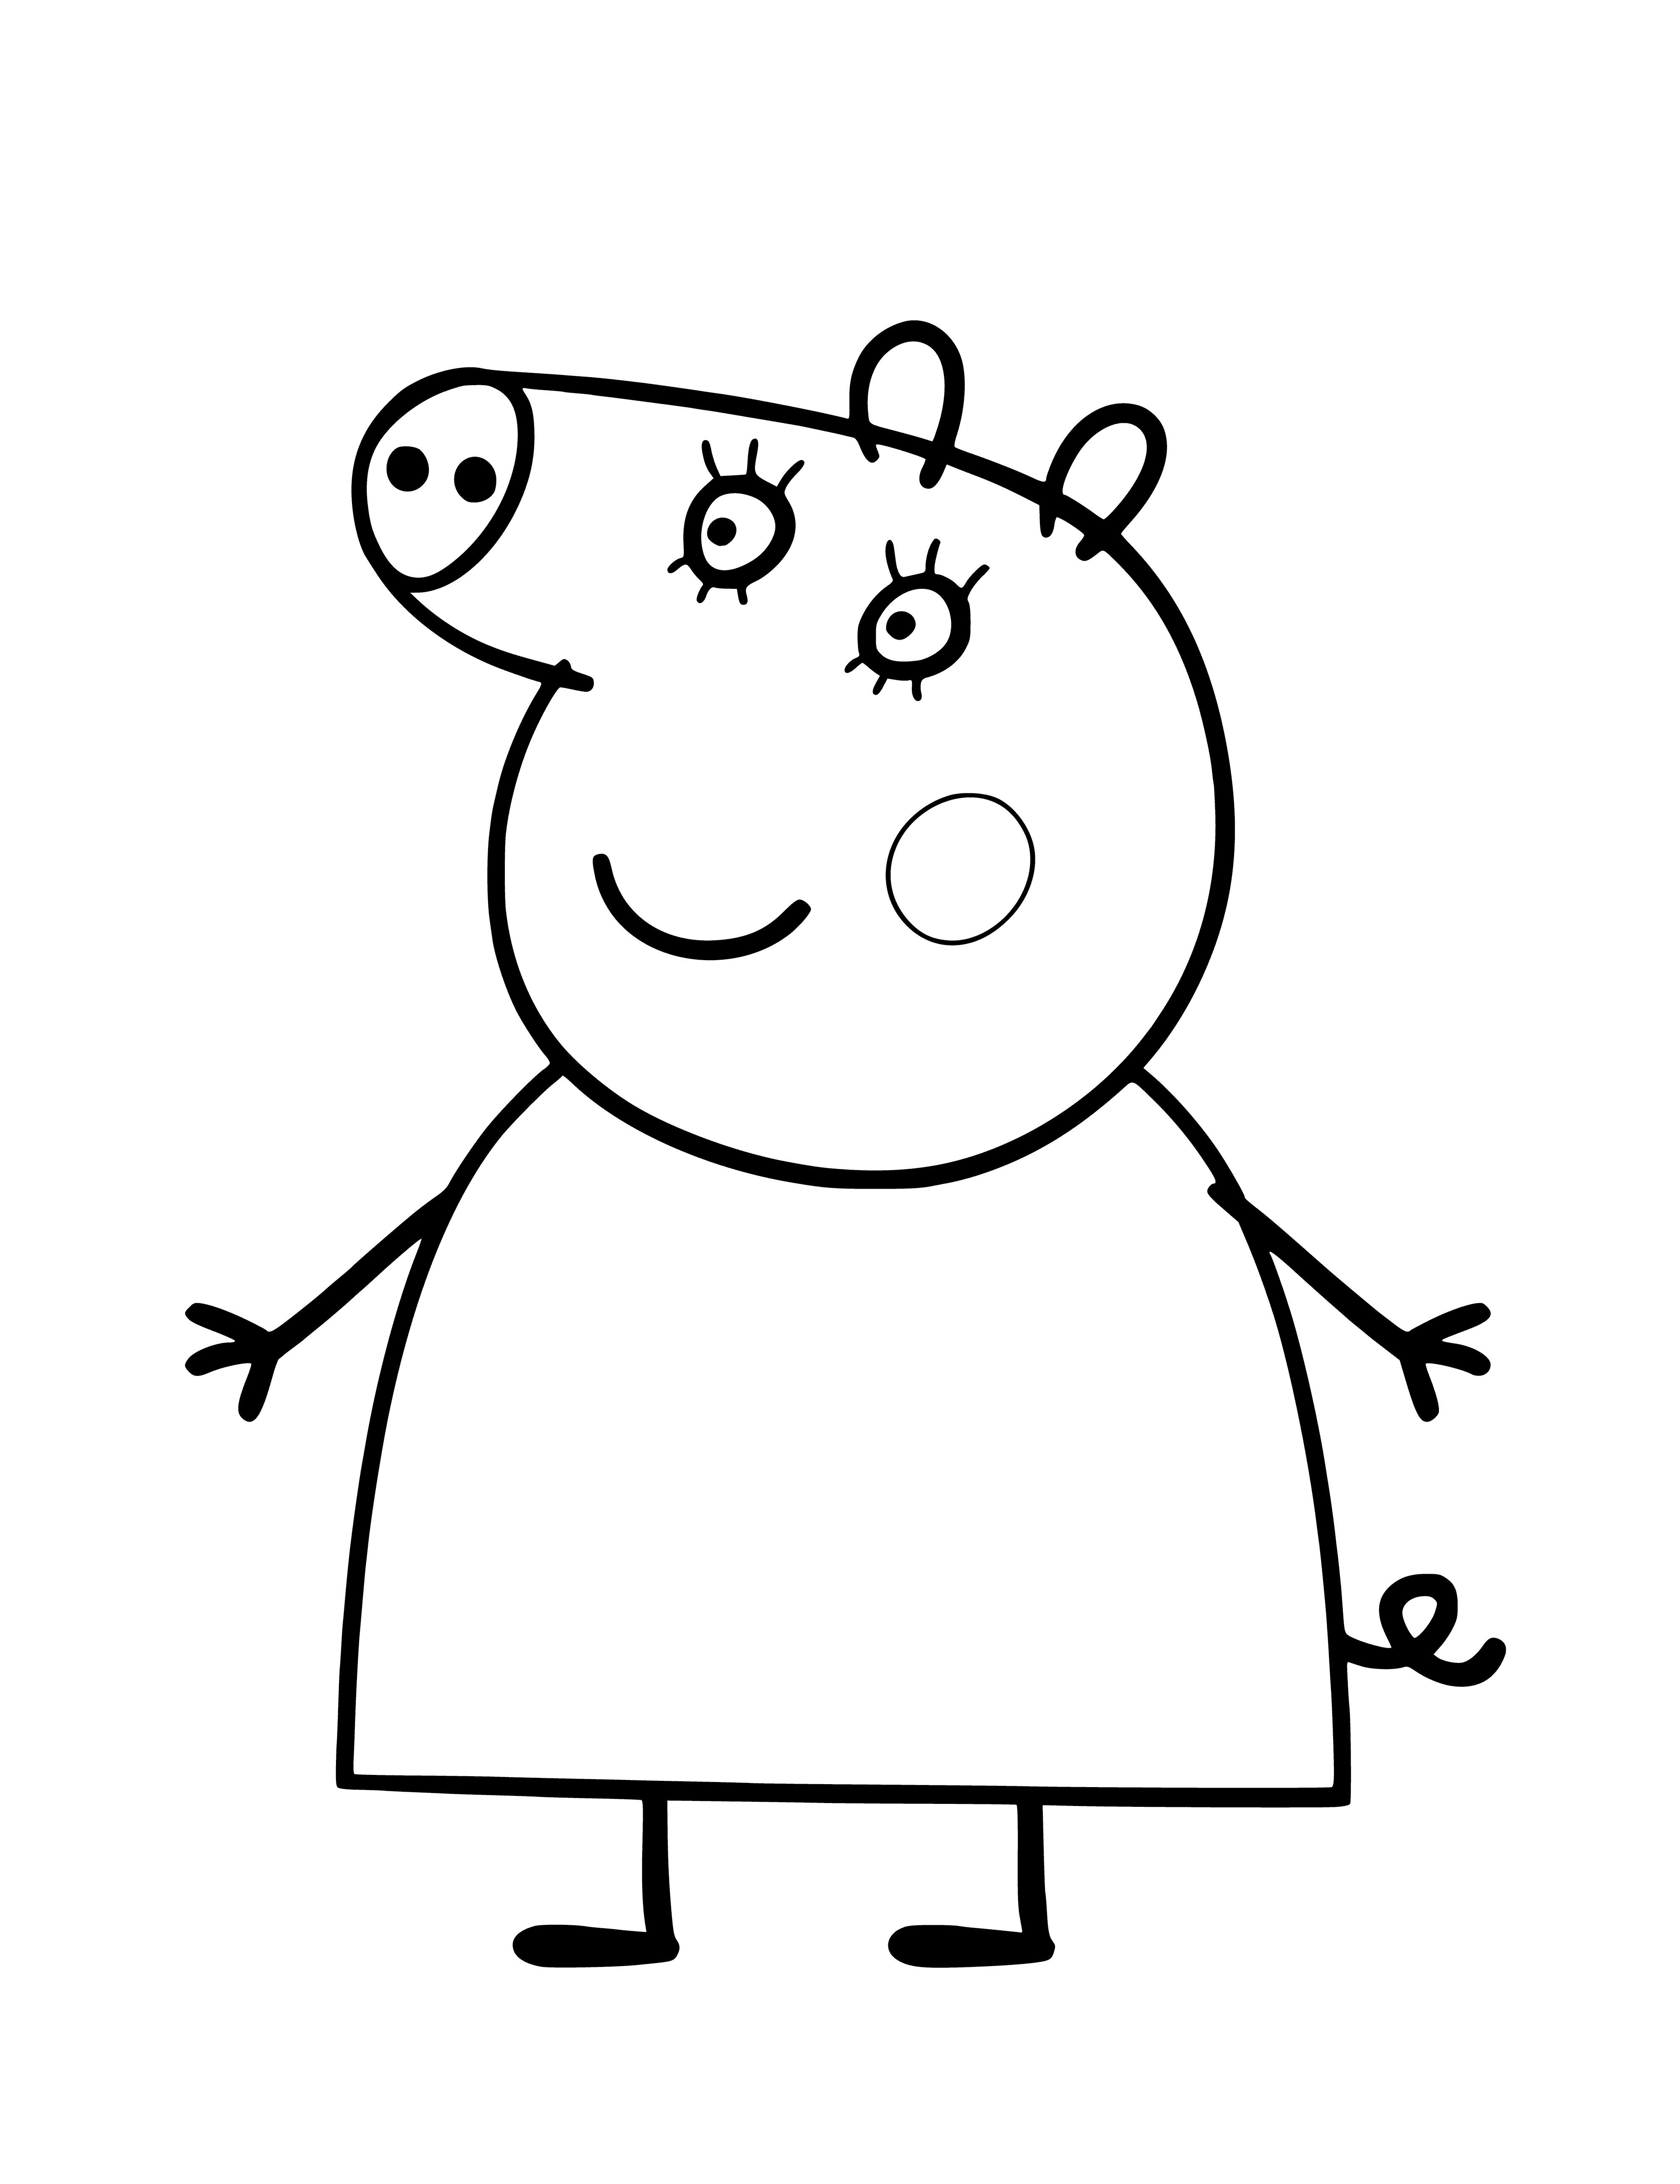 Mom Pig in a dress coloring page